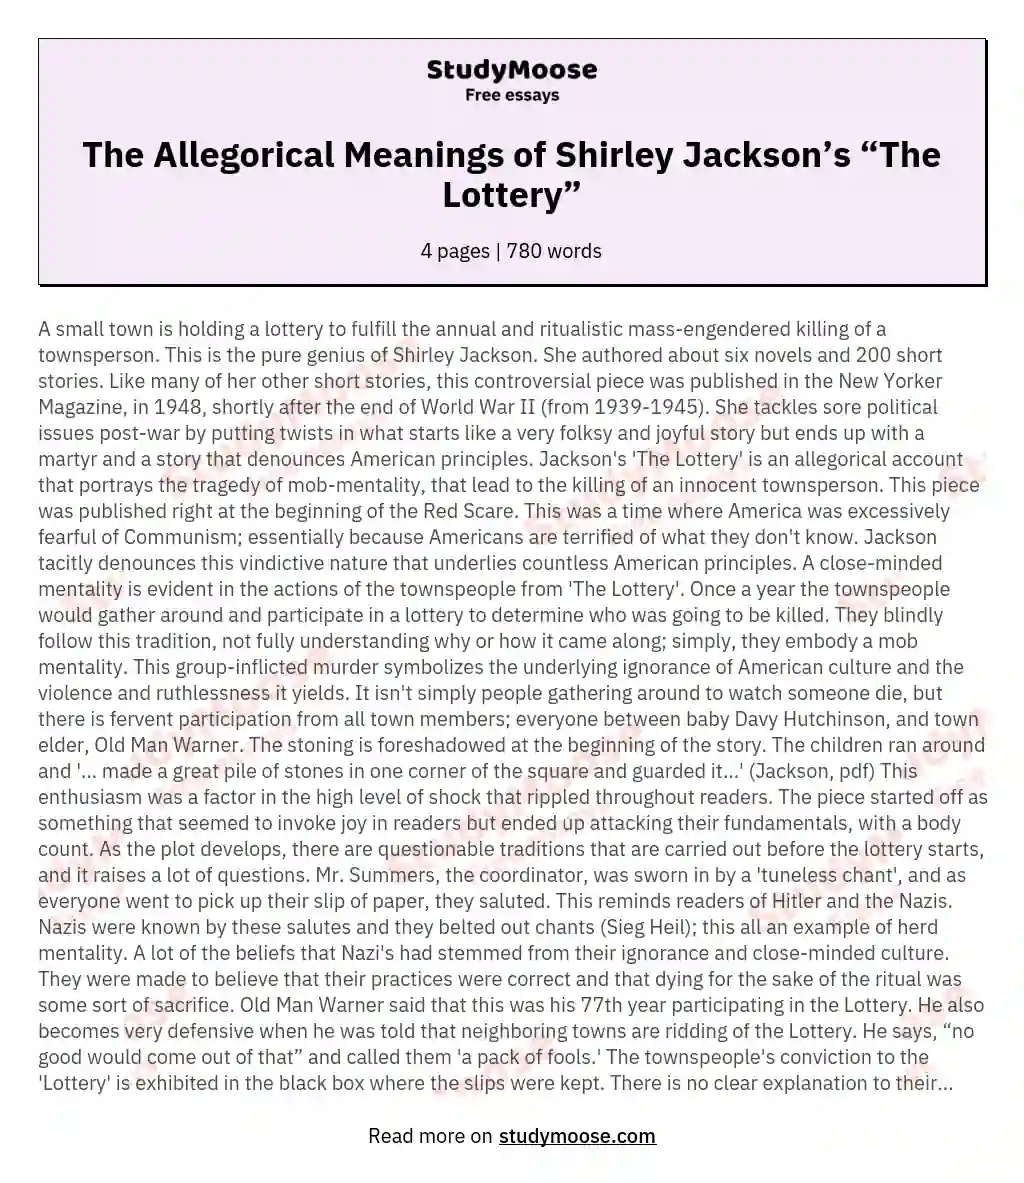 The Allegorical Meanings of Shirley Jackson’s “The Lottery”